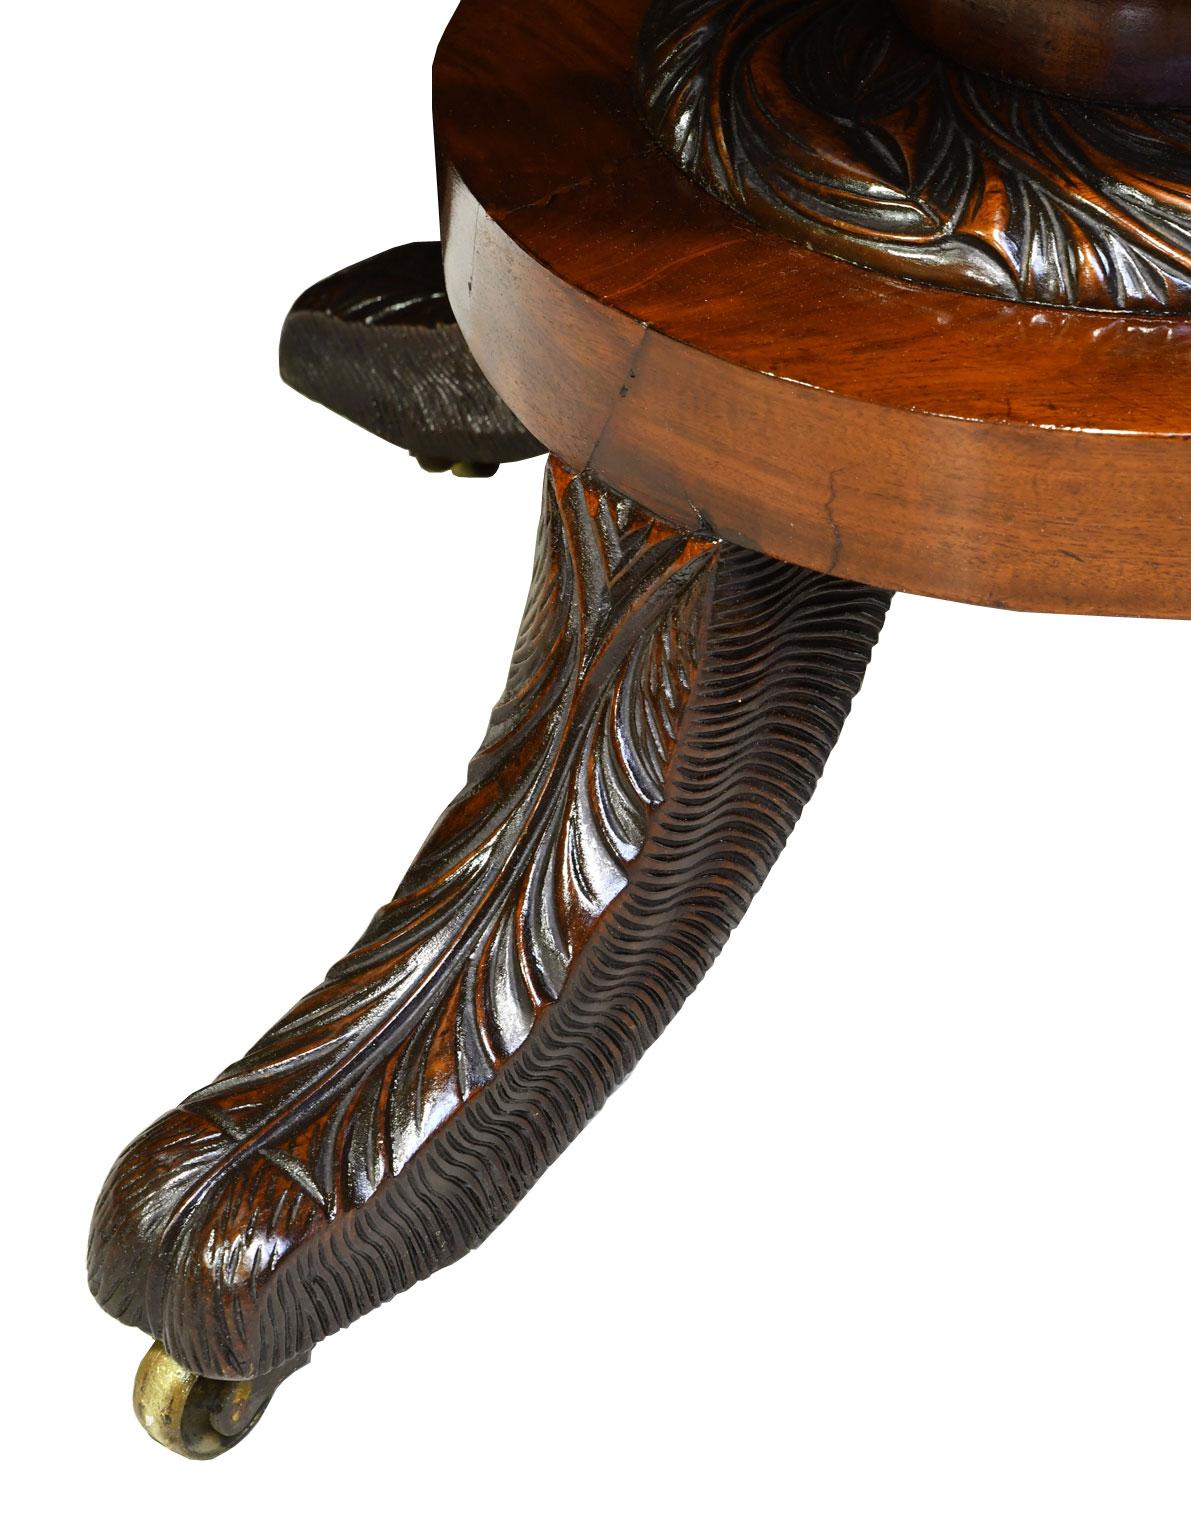 Polished Federal Round Pedestal Table in West Indies Mahogany, New York, circa 1820